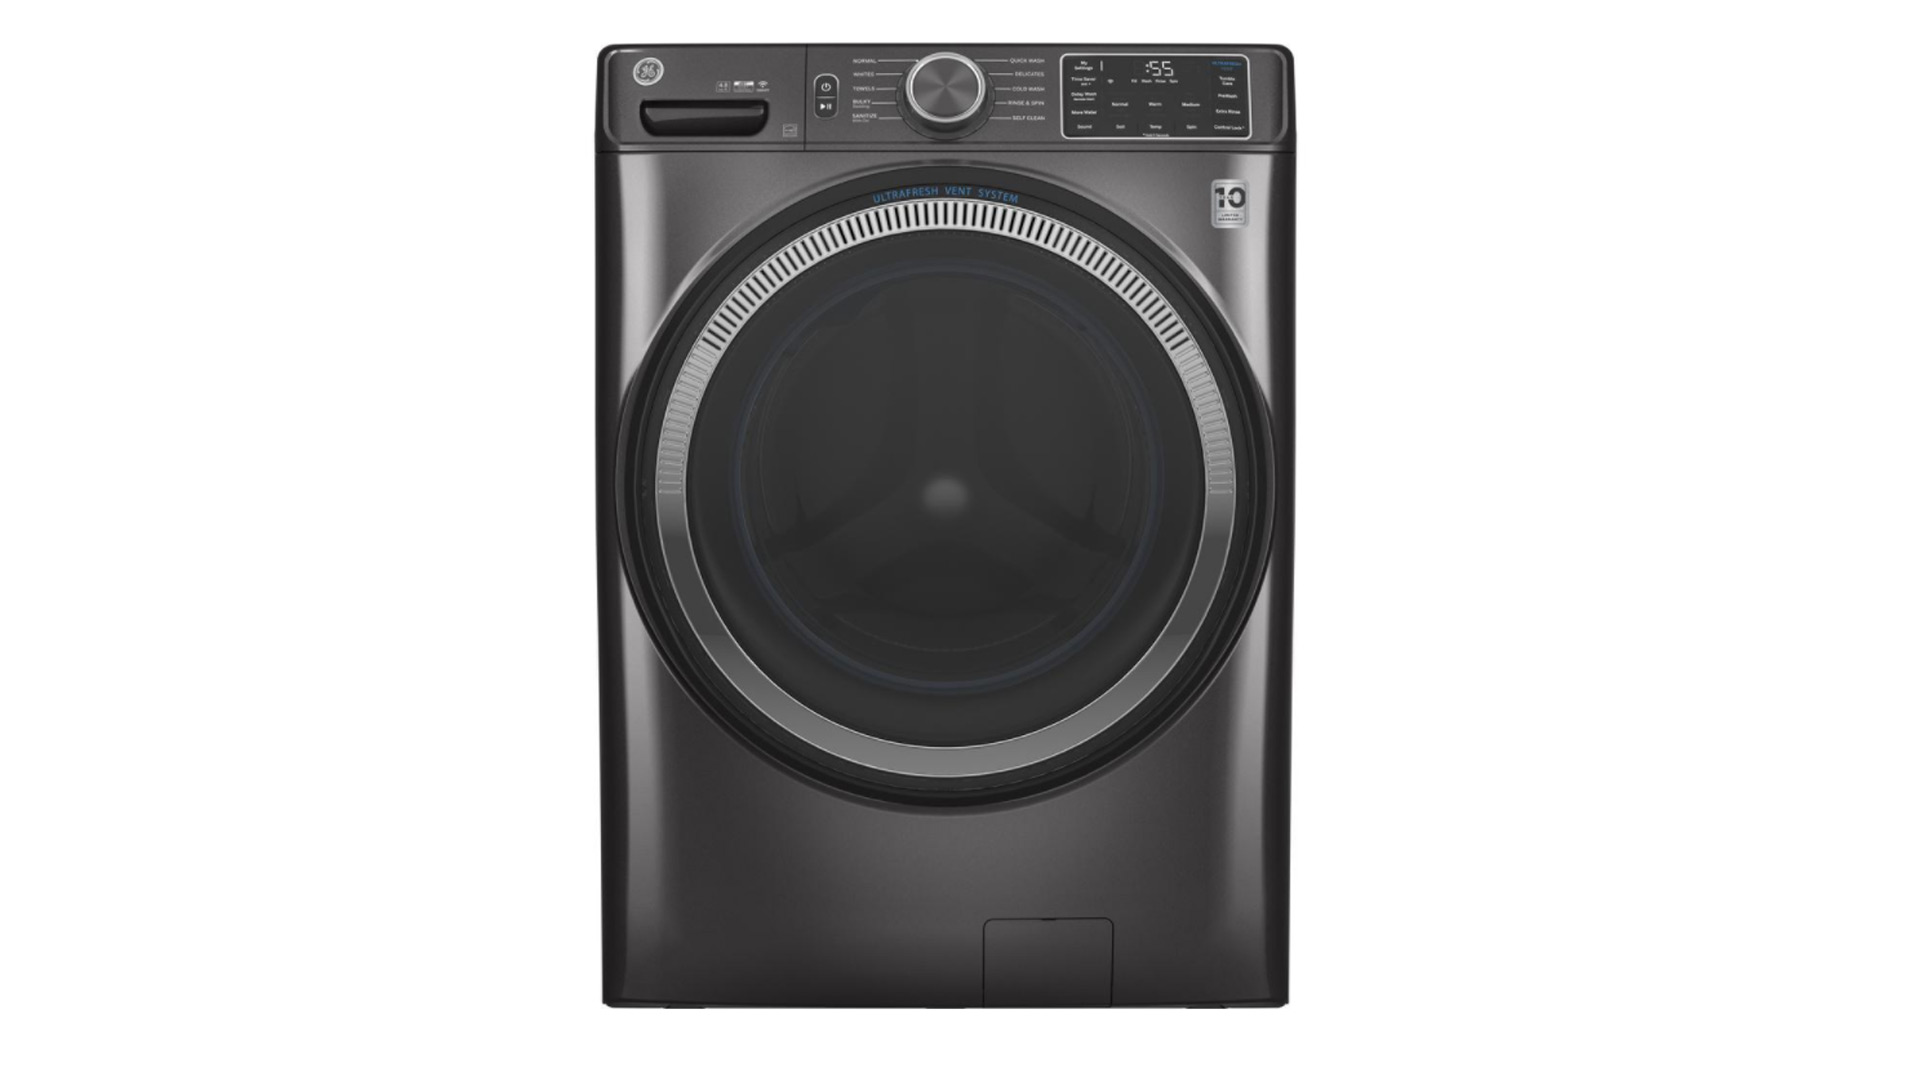 Best front load washers: GE GFW550SSNWW